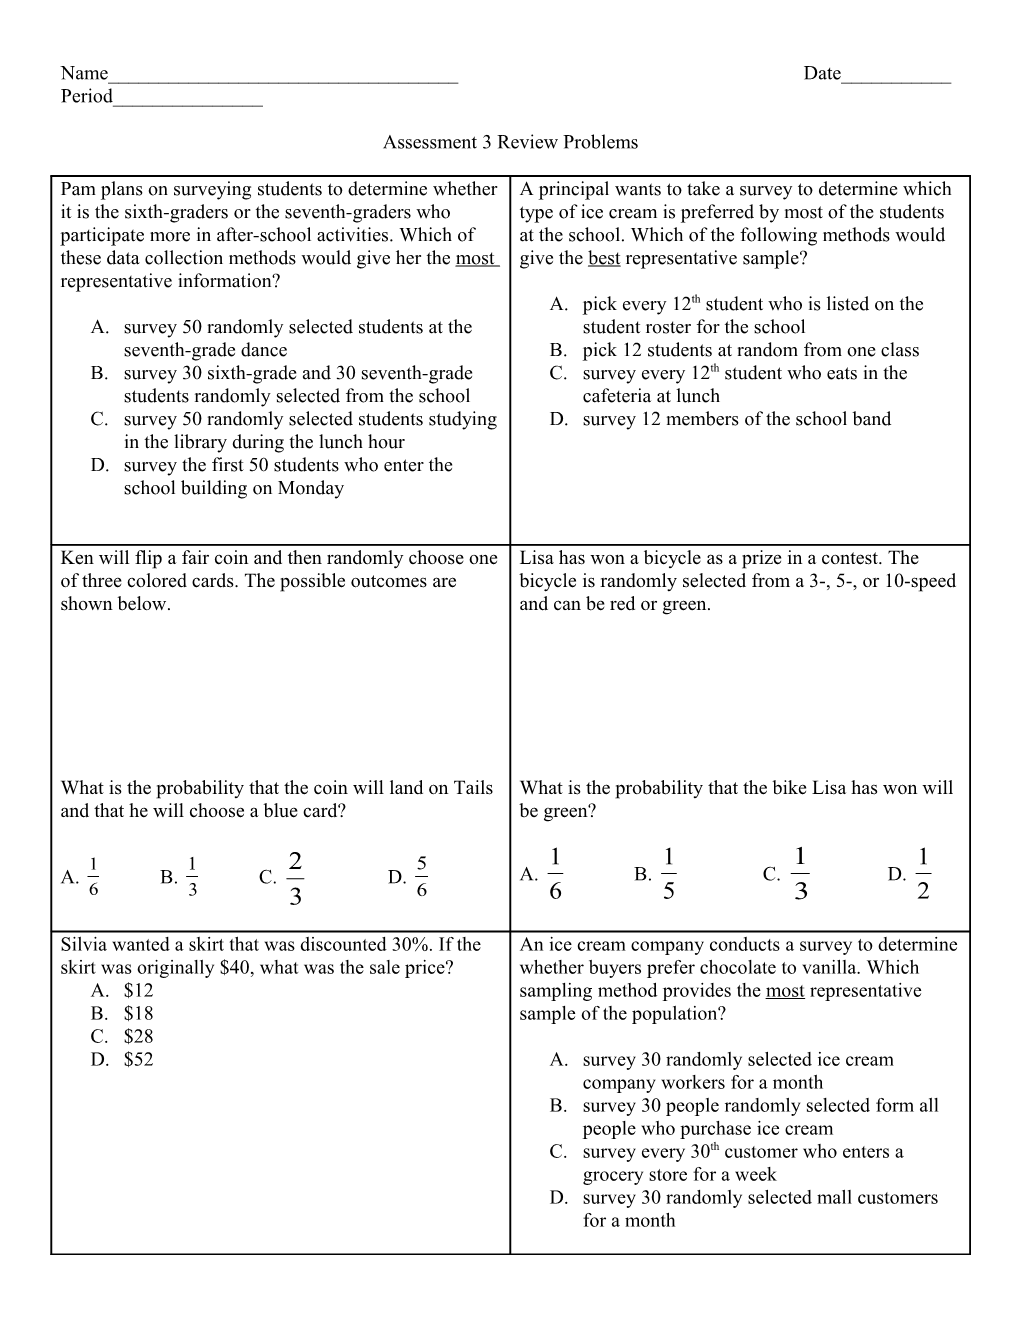 Assessment 3 Review Problems